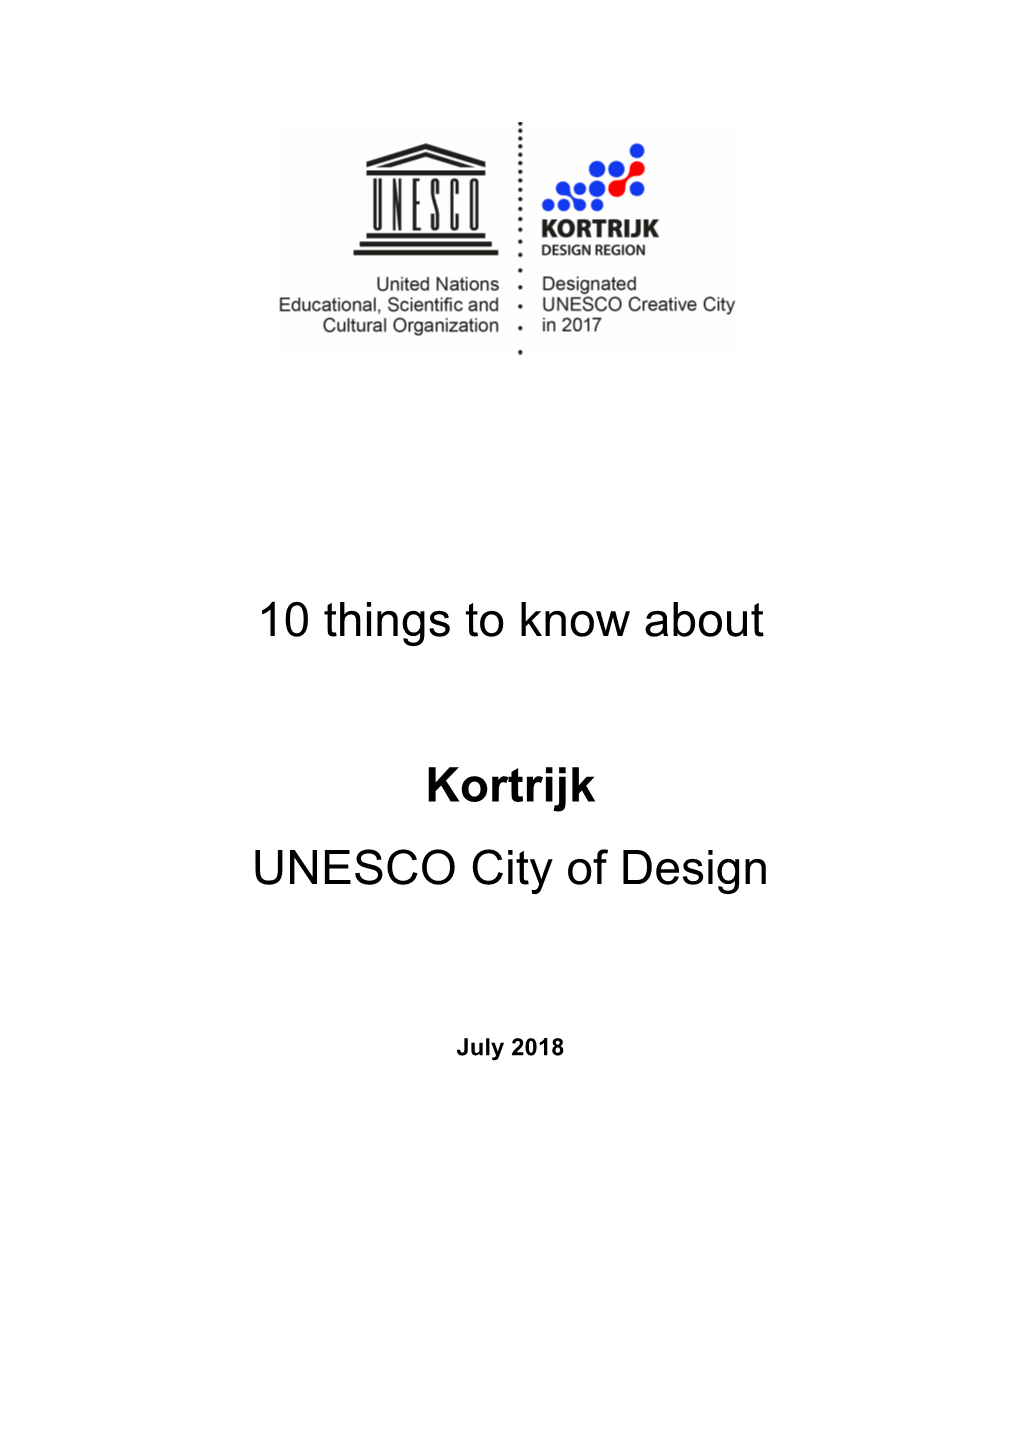 10 Things to Know About the Region Kortrijk (PDF)